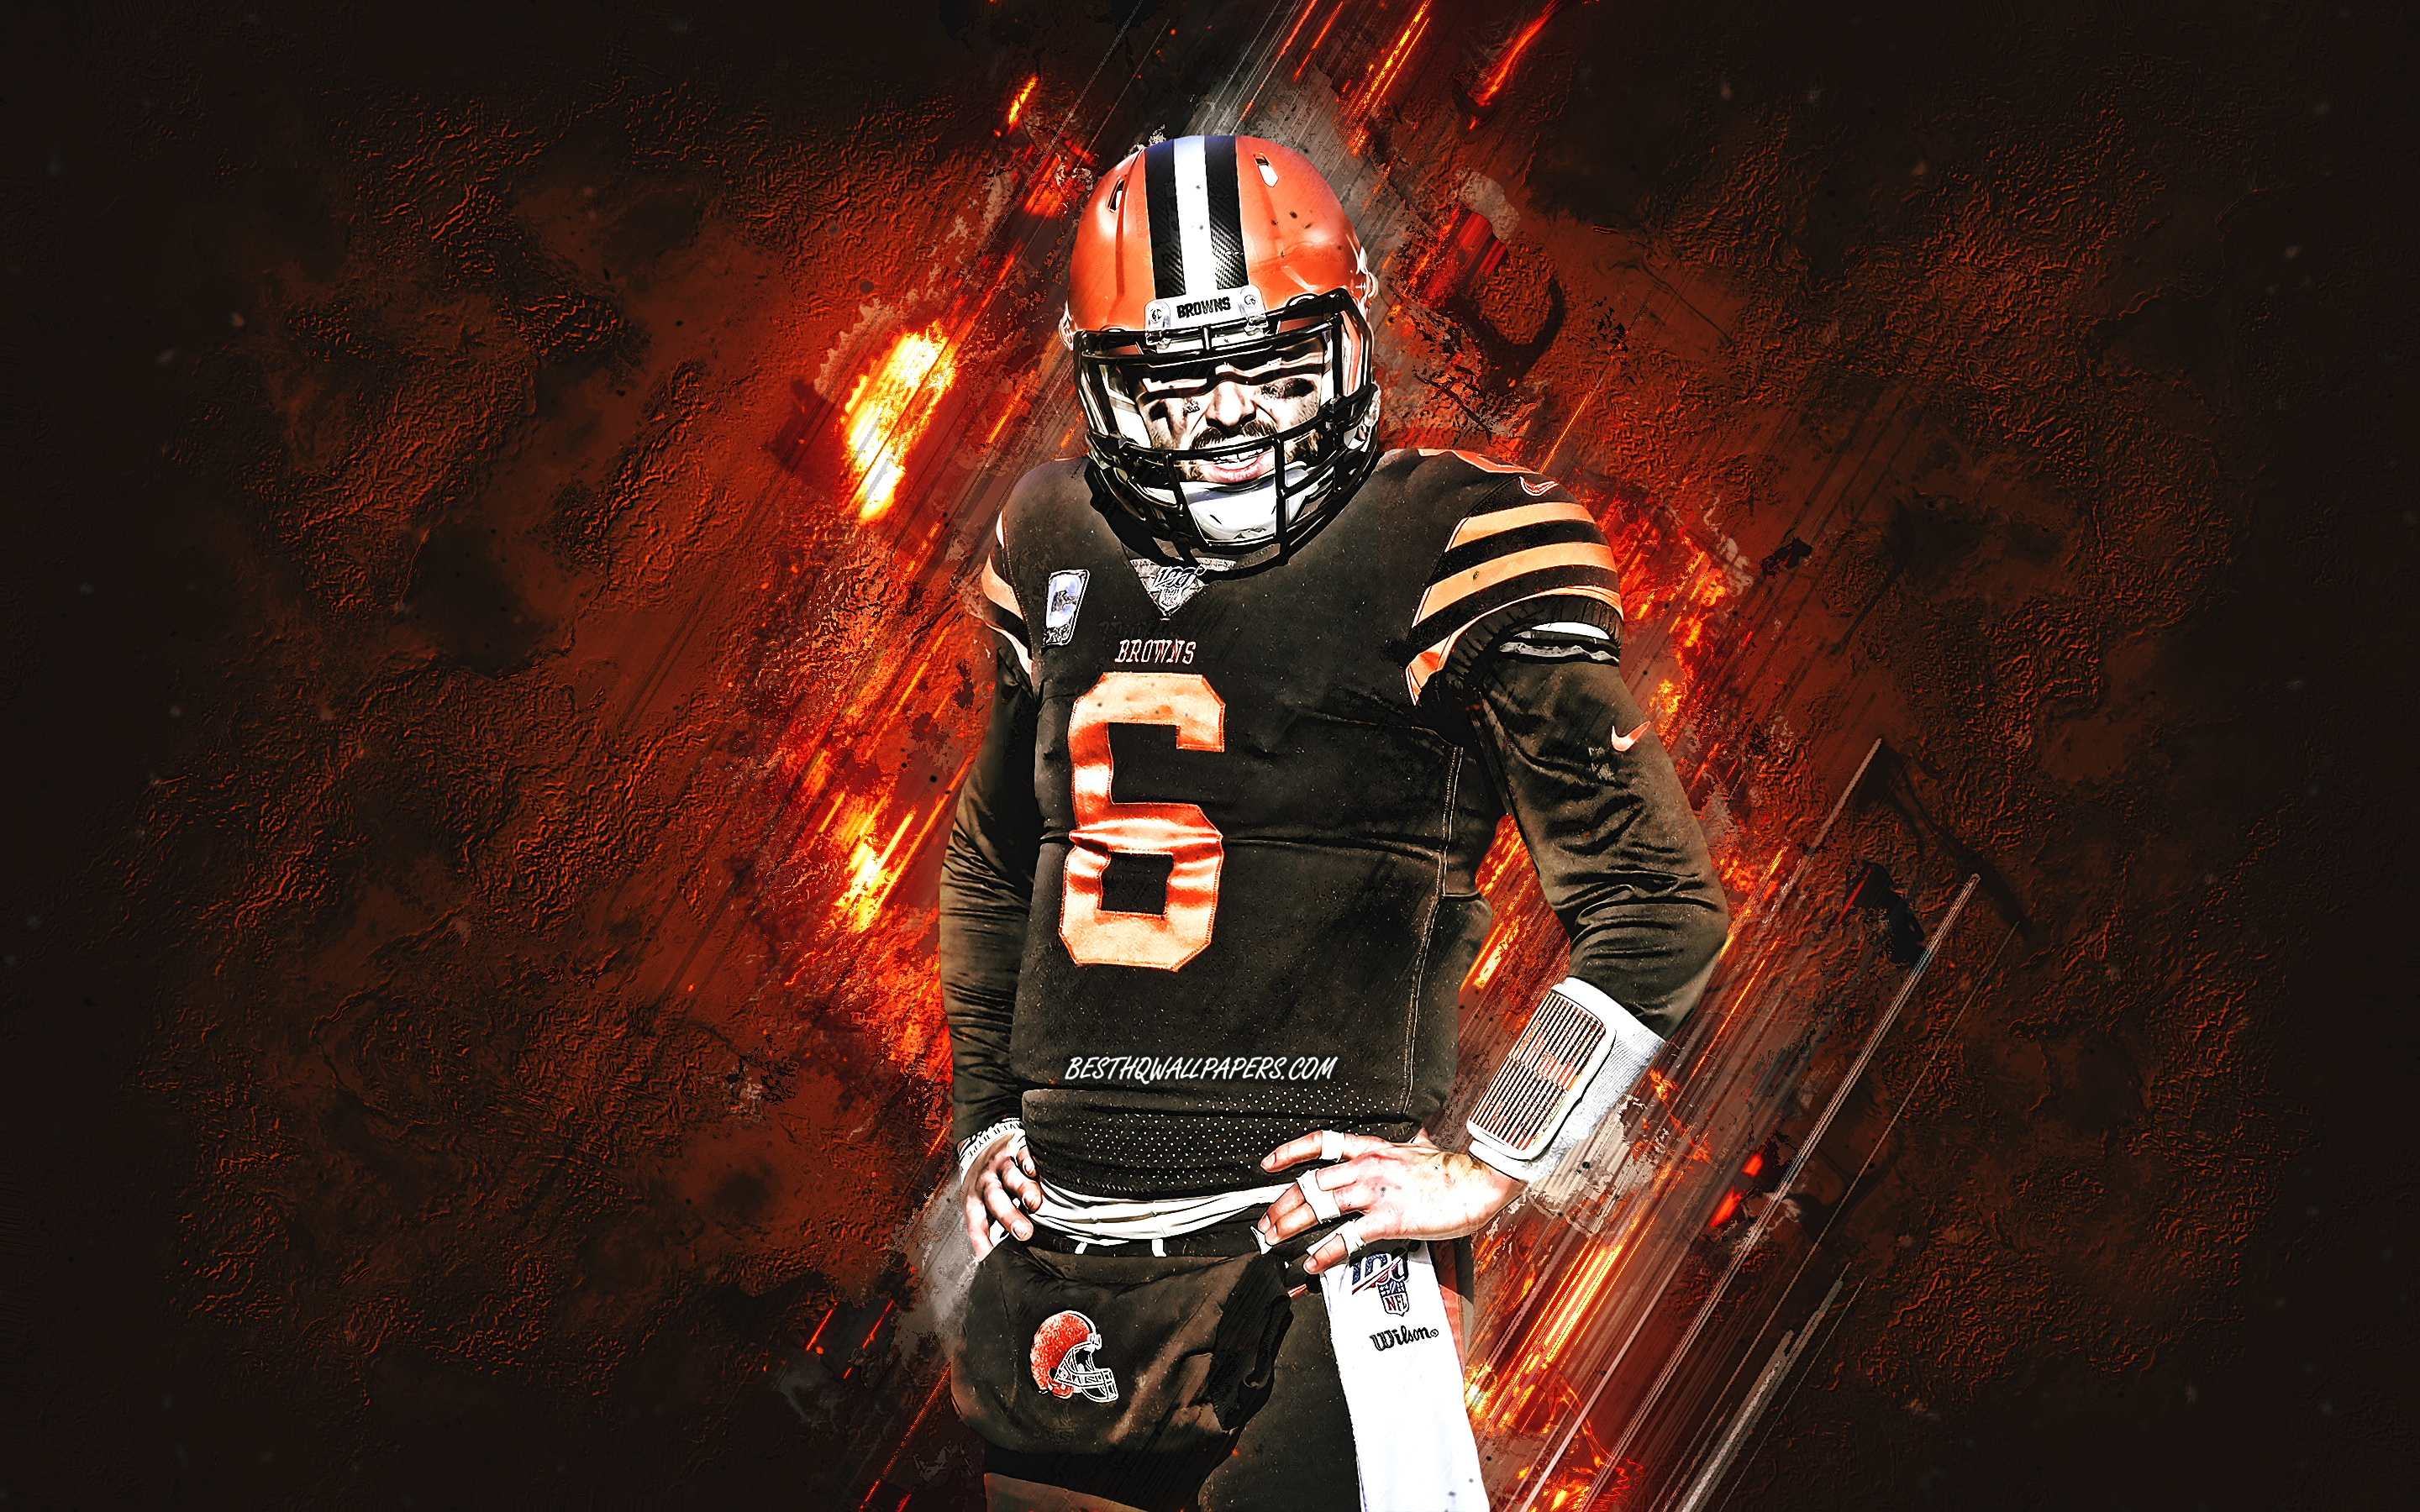 Download wallpaper Baker Mayfield, Cleveland Browns, NFL, american football, portrait, orange stone background, National Football League for desktop with resolution 2880x1800. High Quality HD picture wallpaper